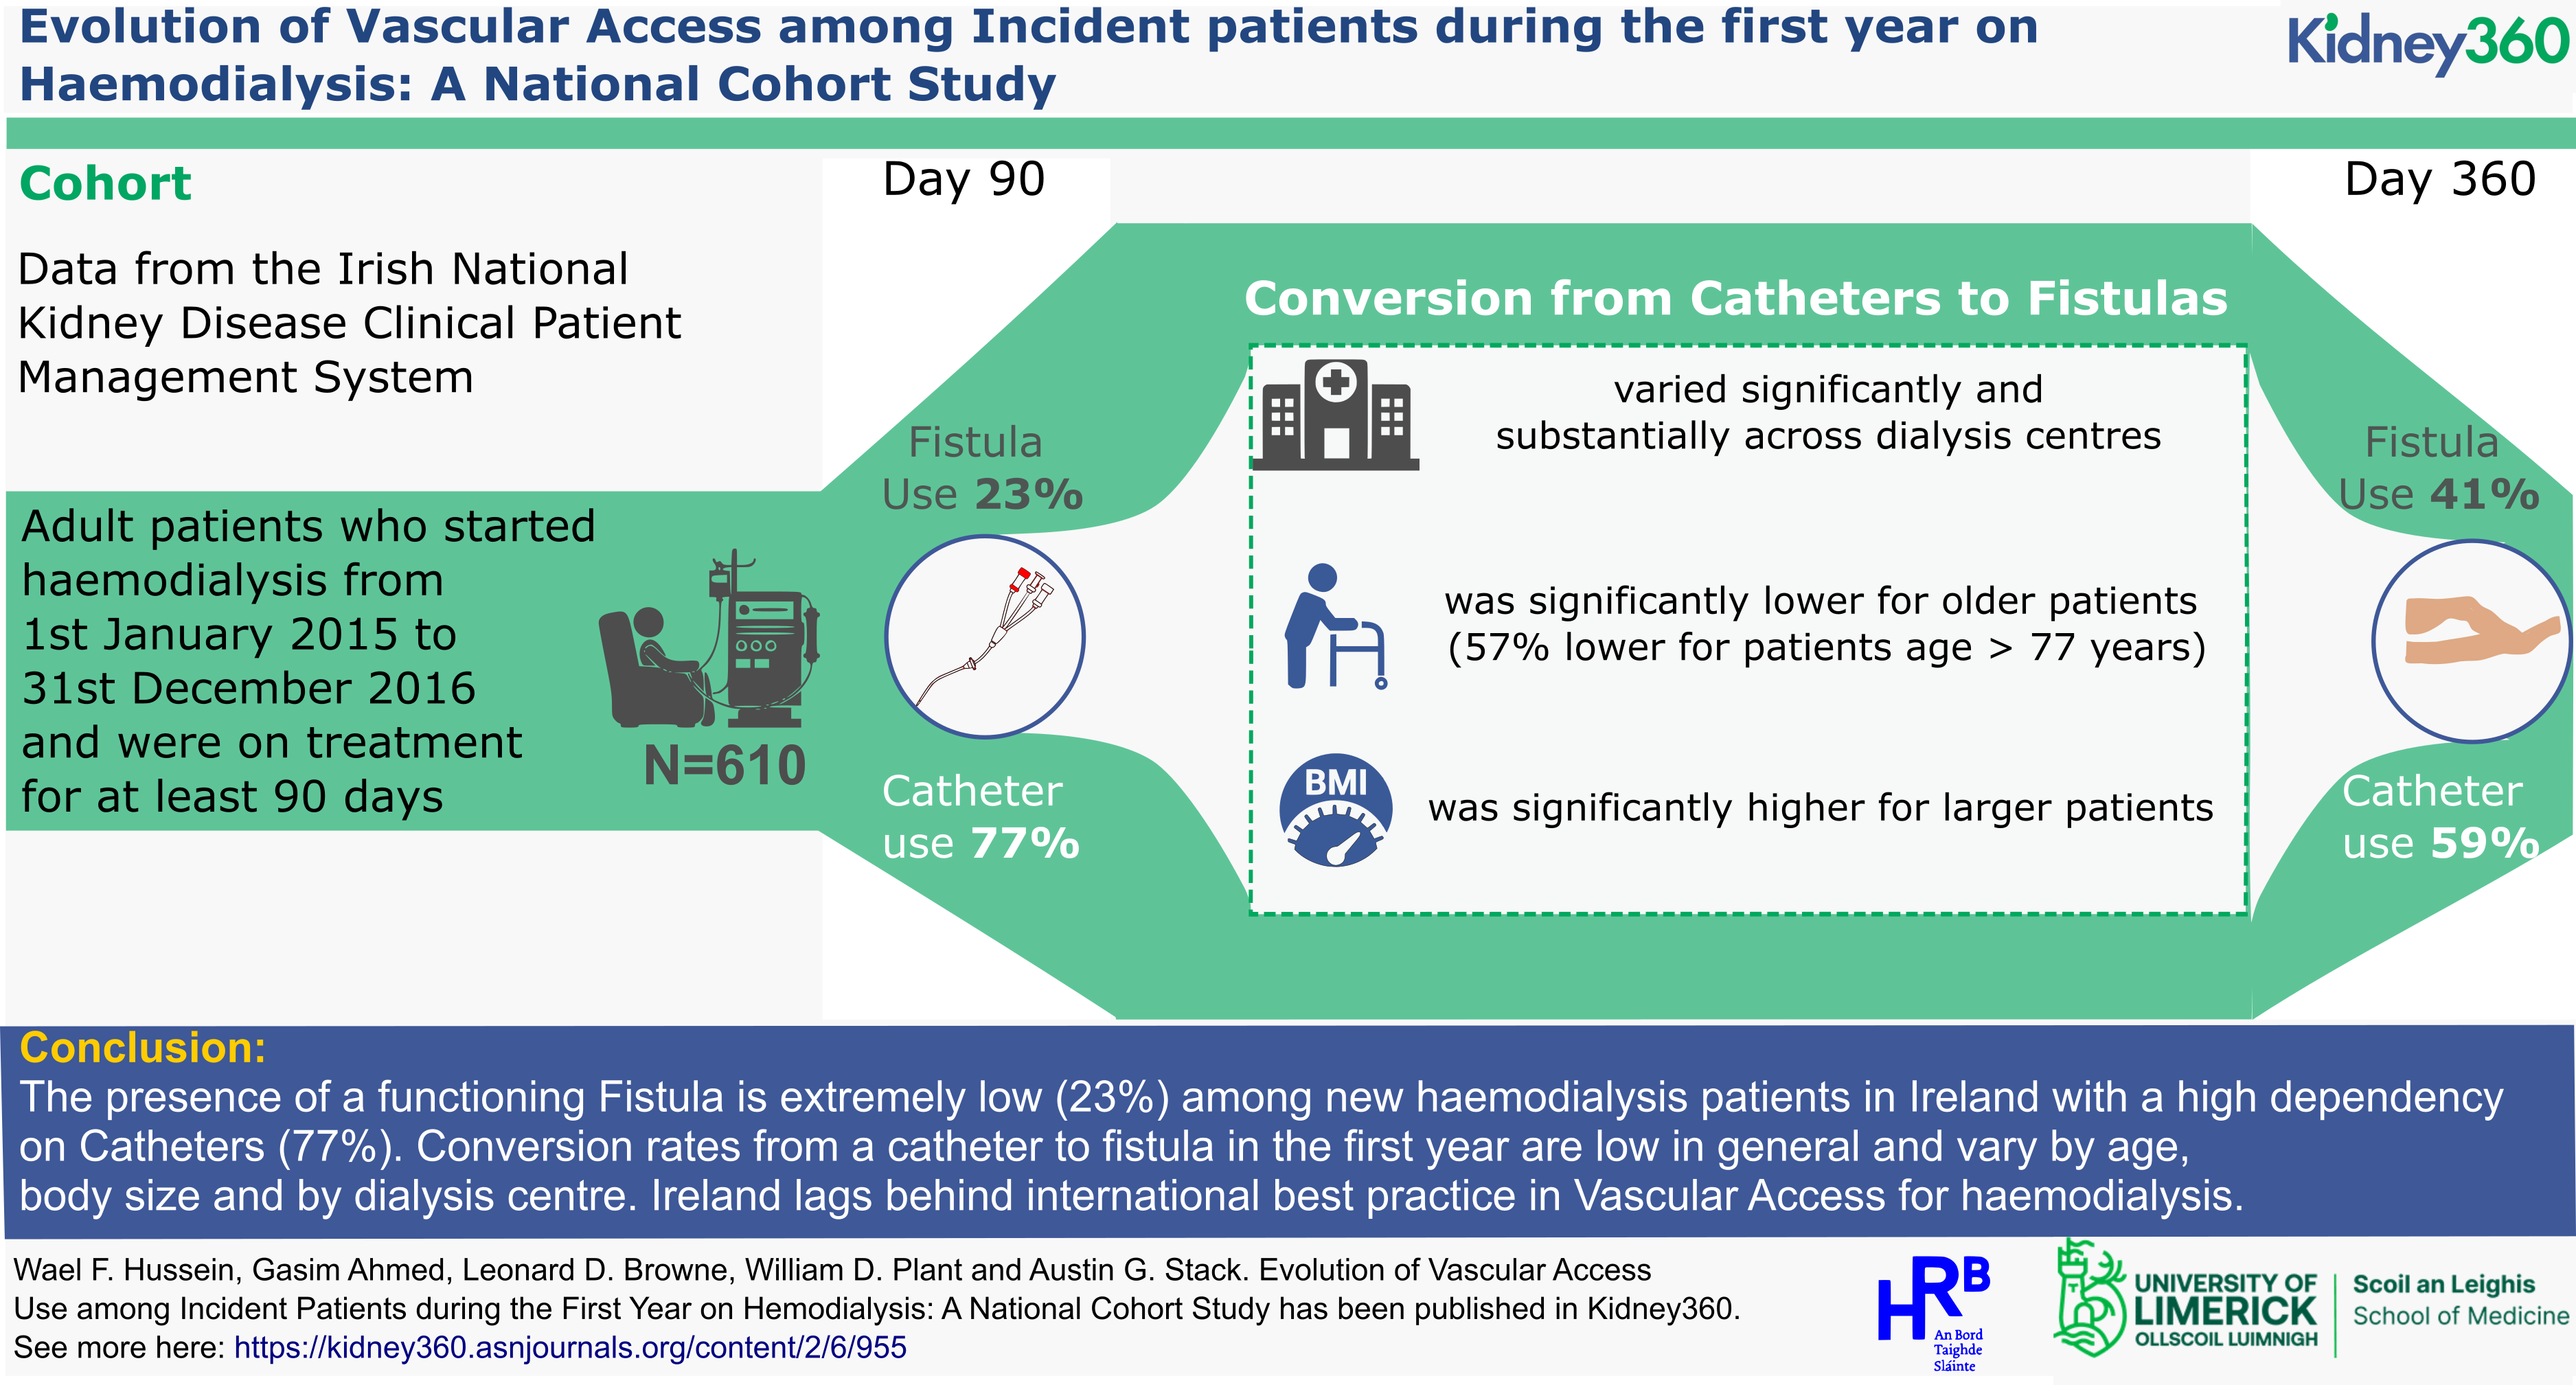 Evolution of Vascular Access Use among Incident Patients during the First Year on Hemodialysis: A National Cohort Study